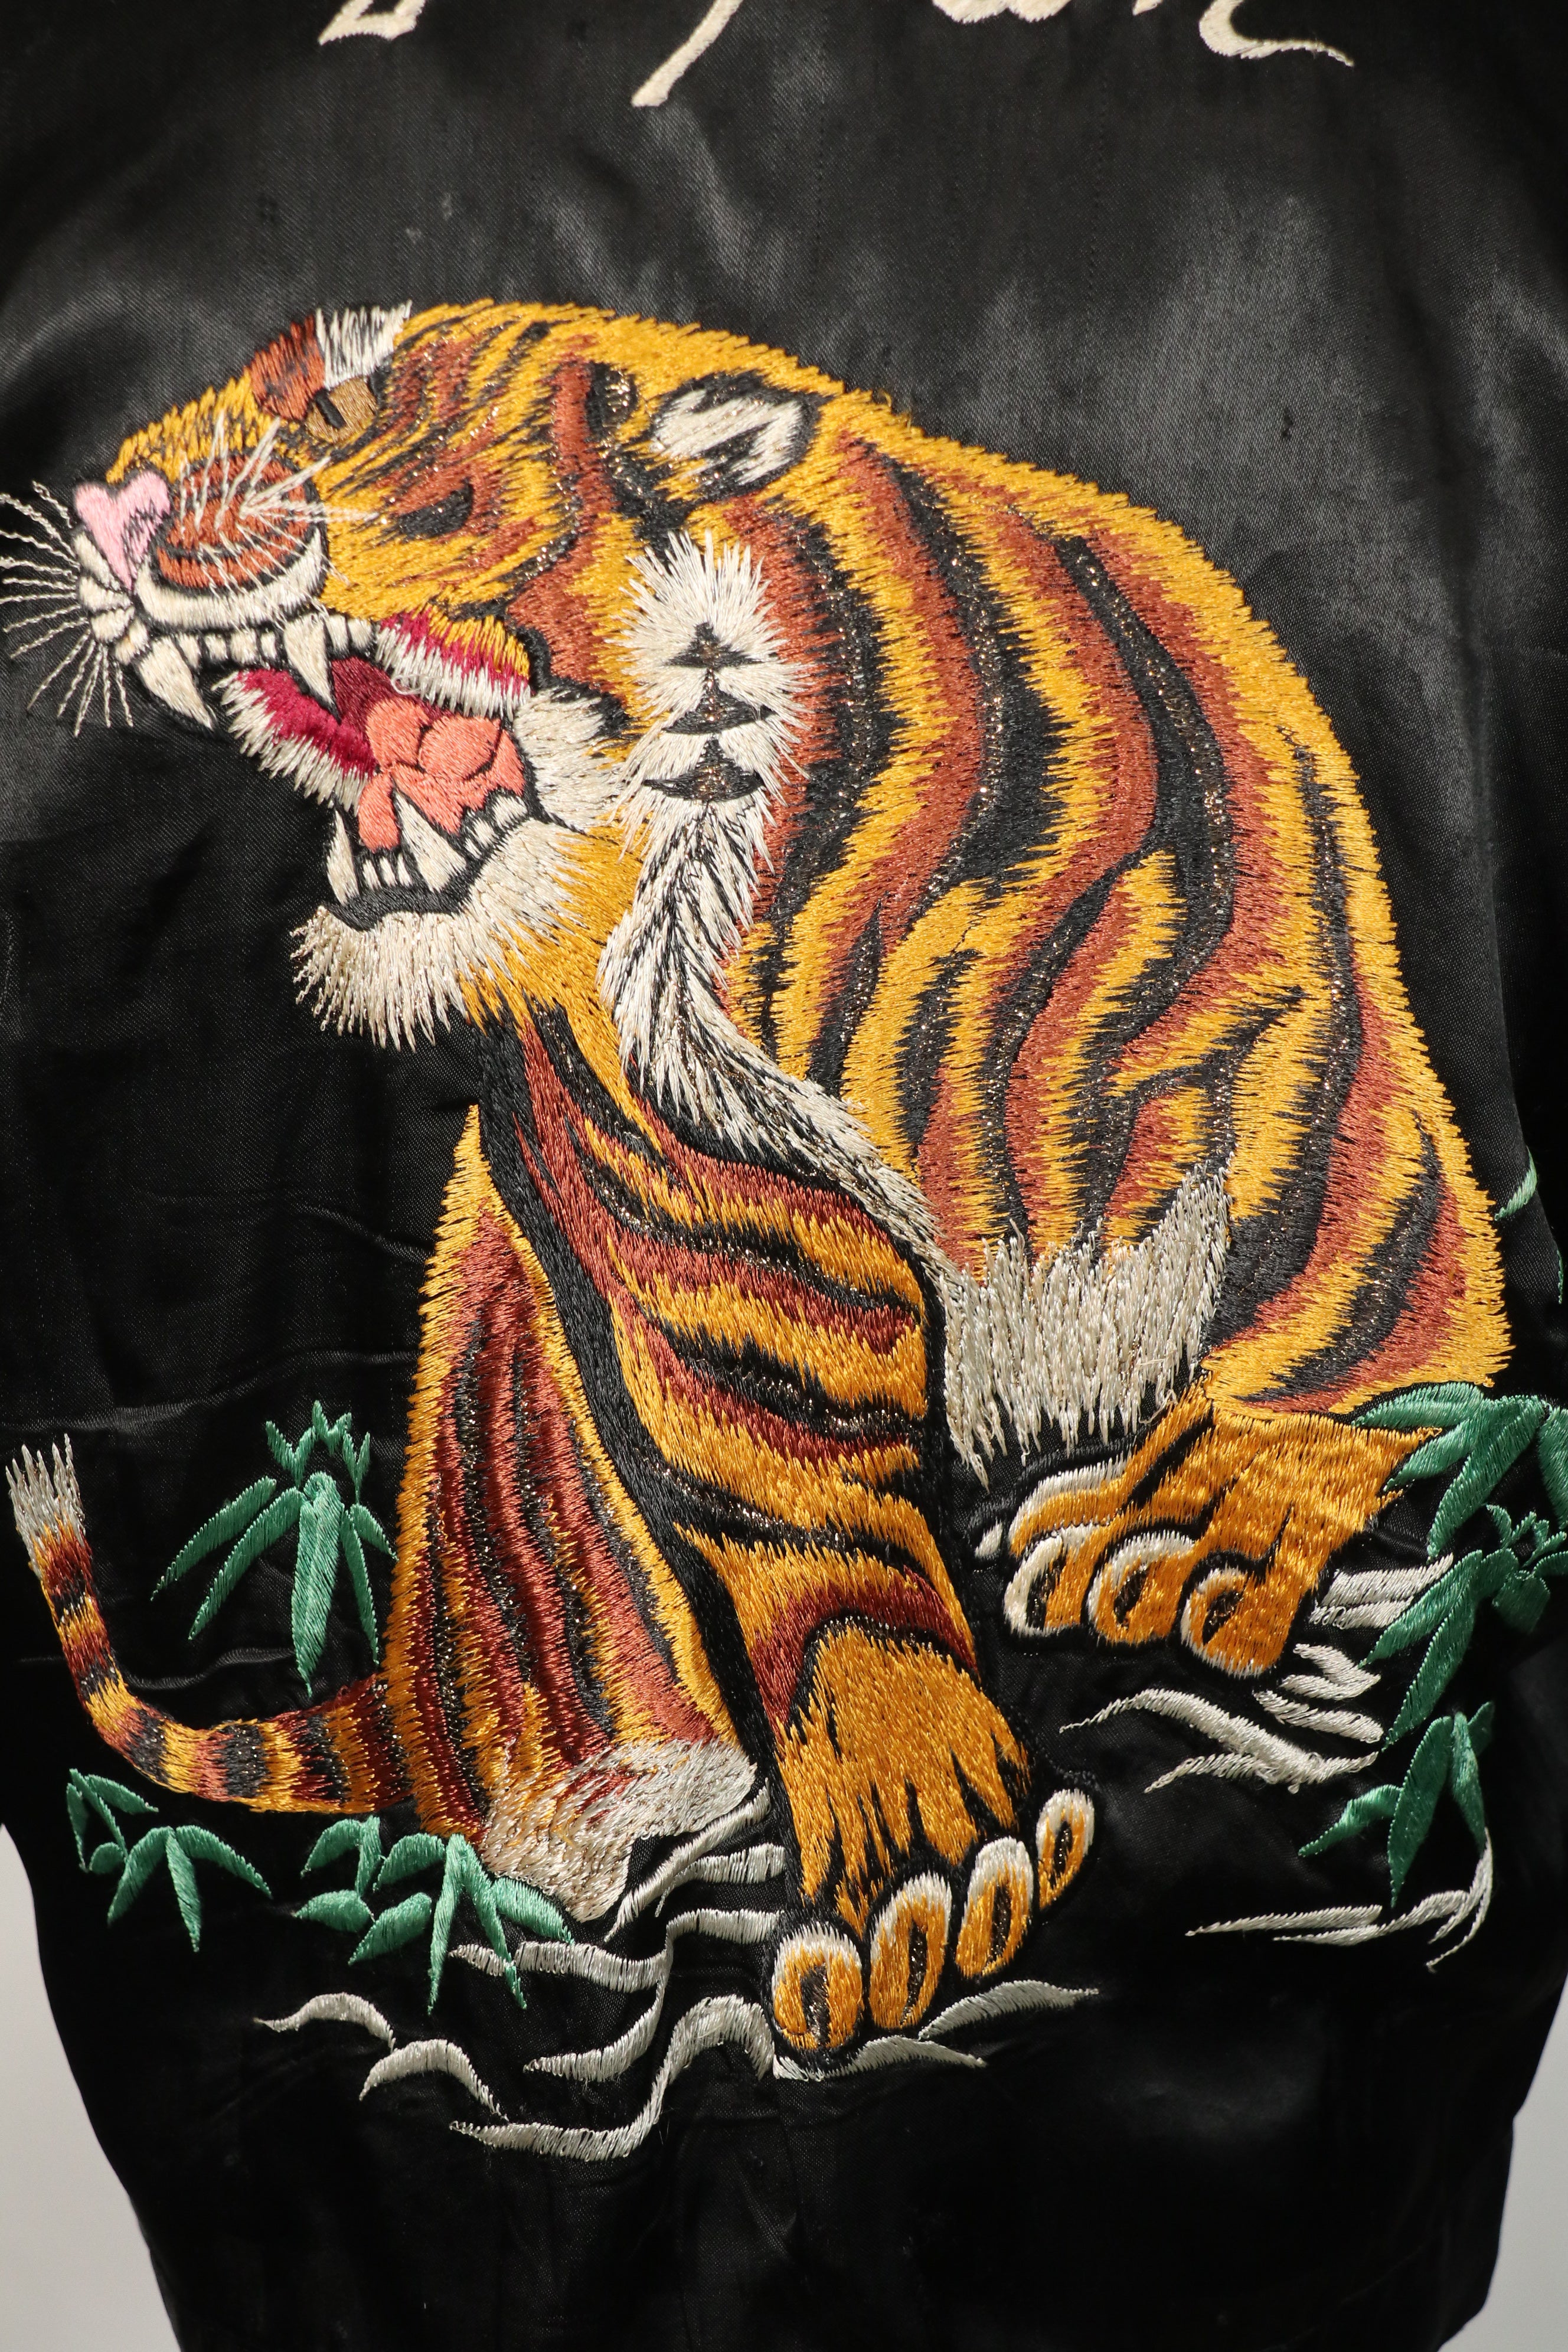 Estimated late 1940s-early 1950s early Japan Jacket, tiger embroidery, small scratches.